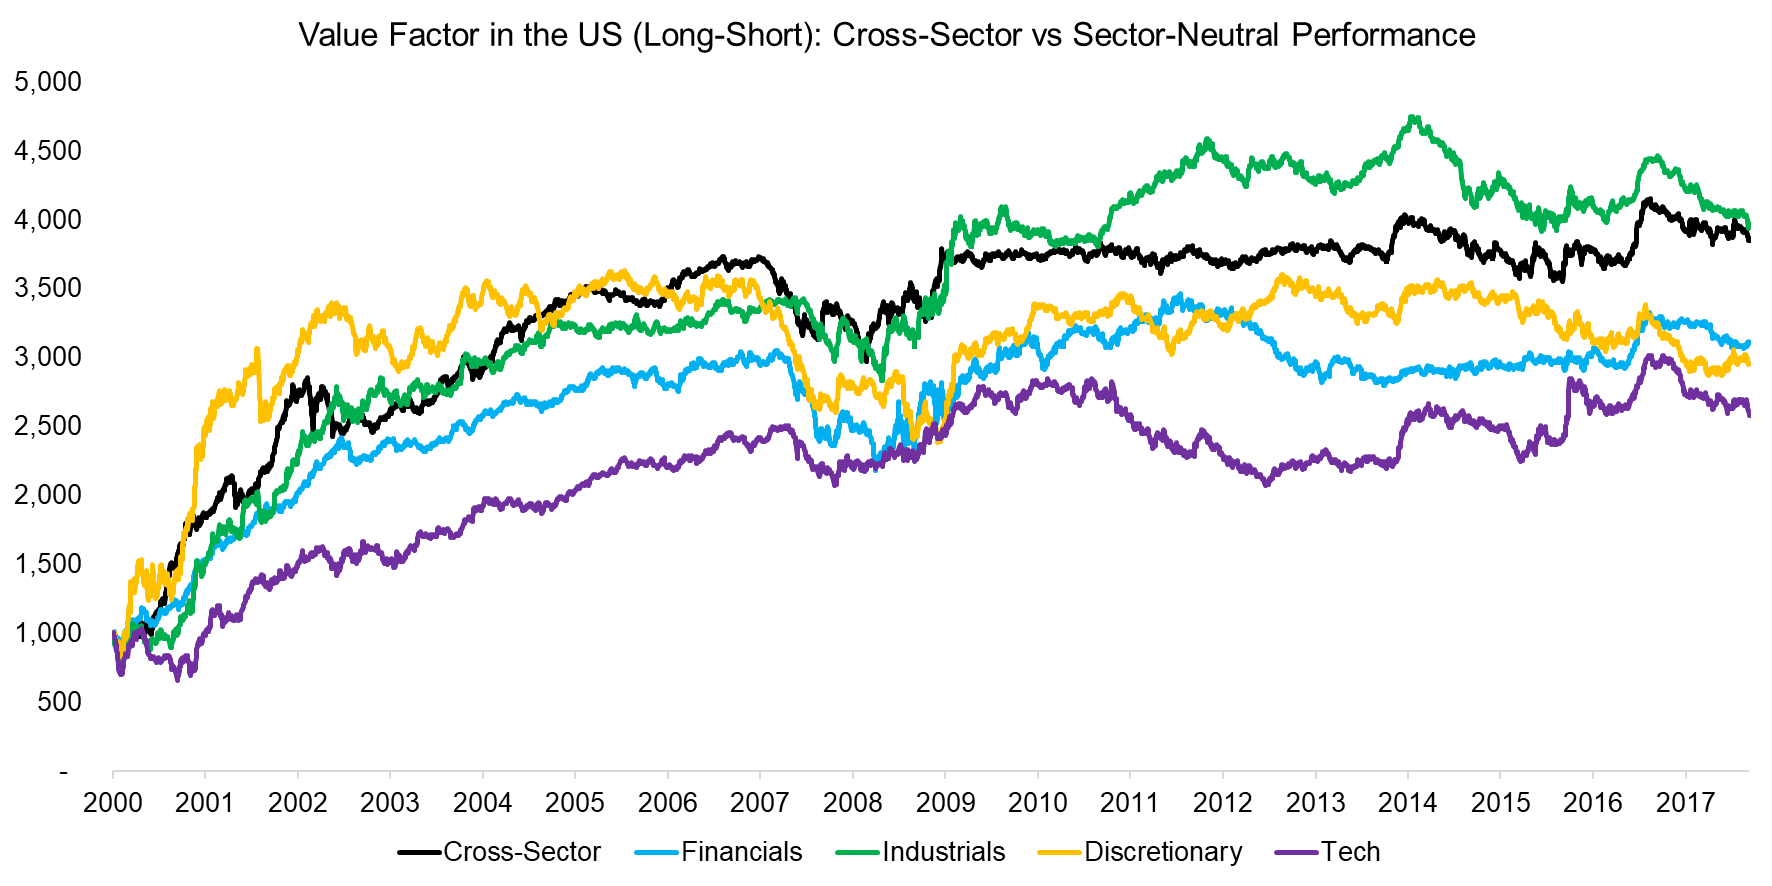 Value Factor in the US (Long-Short) Cross-Sector vs Sector-Neutral Performance